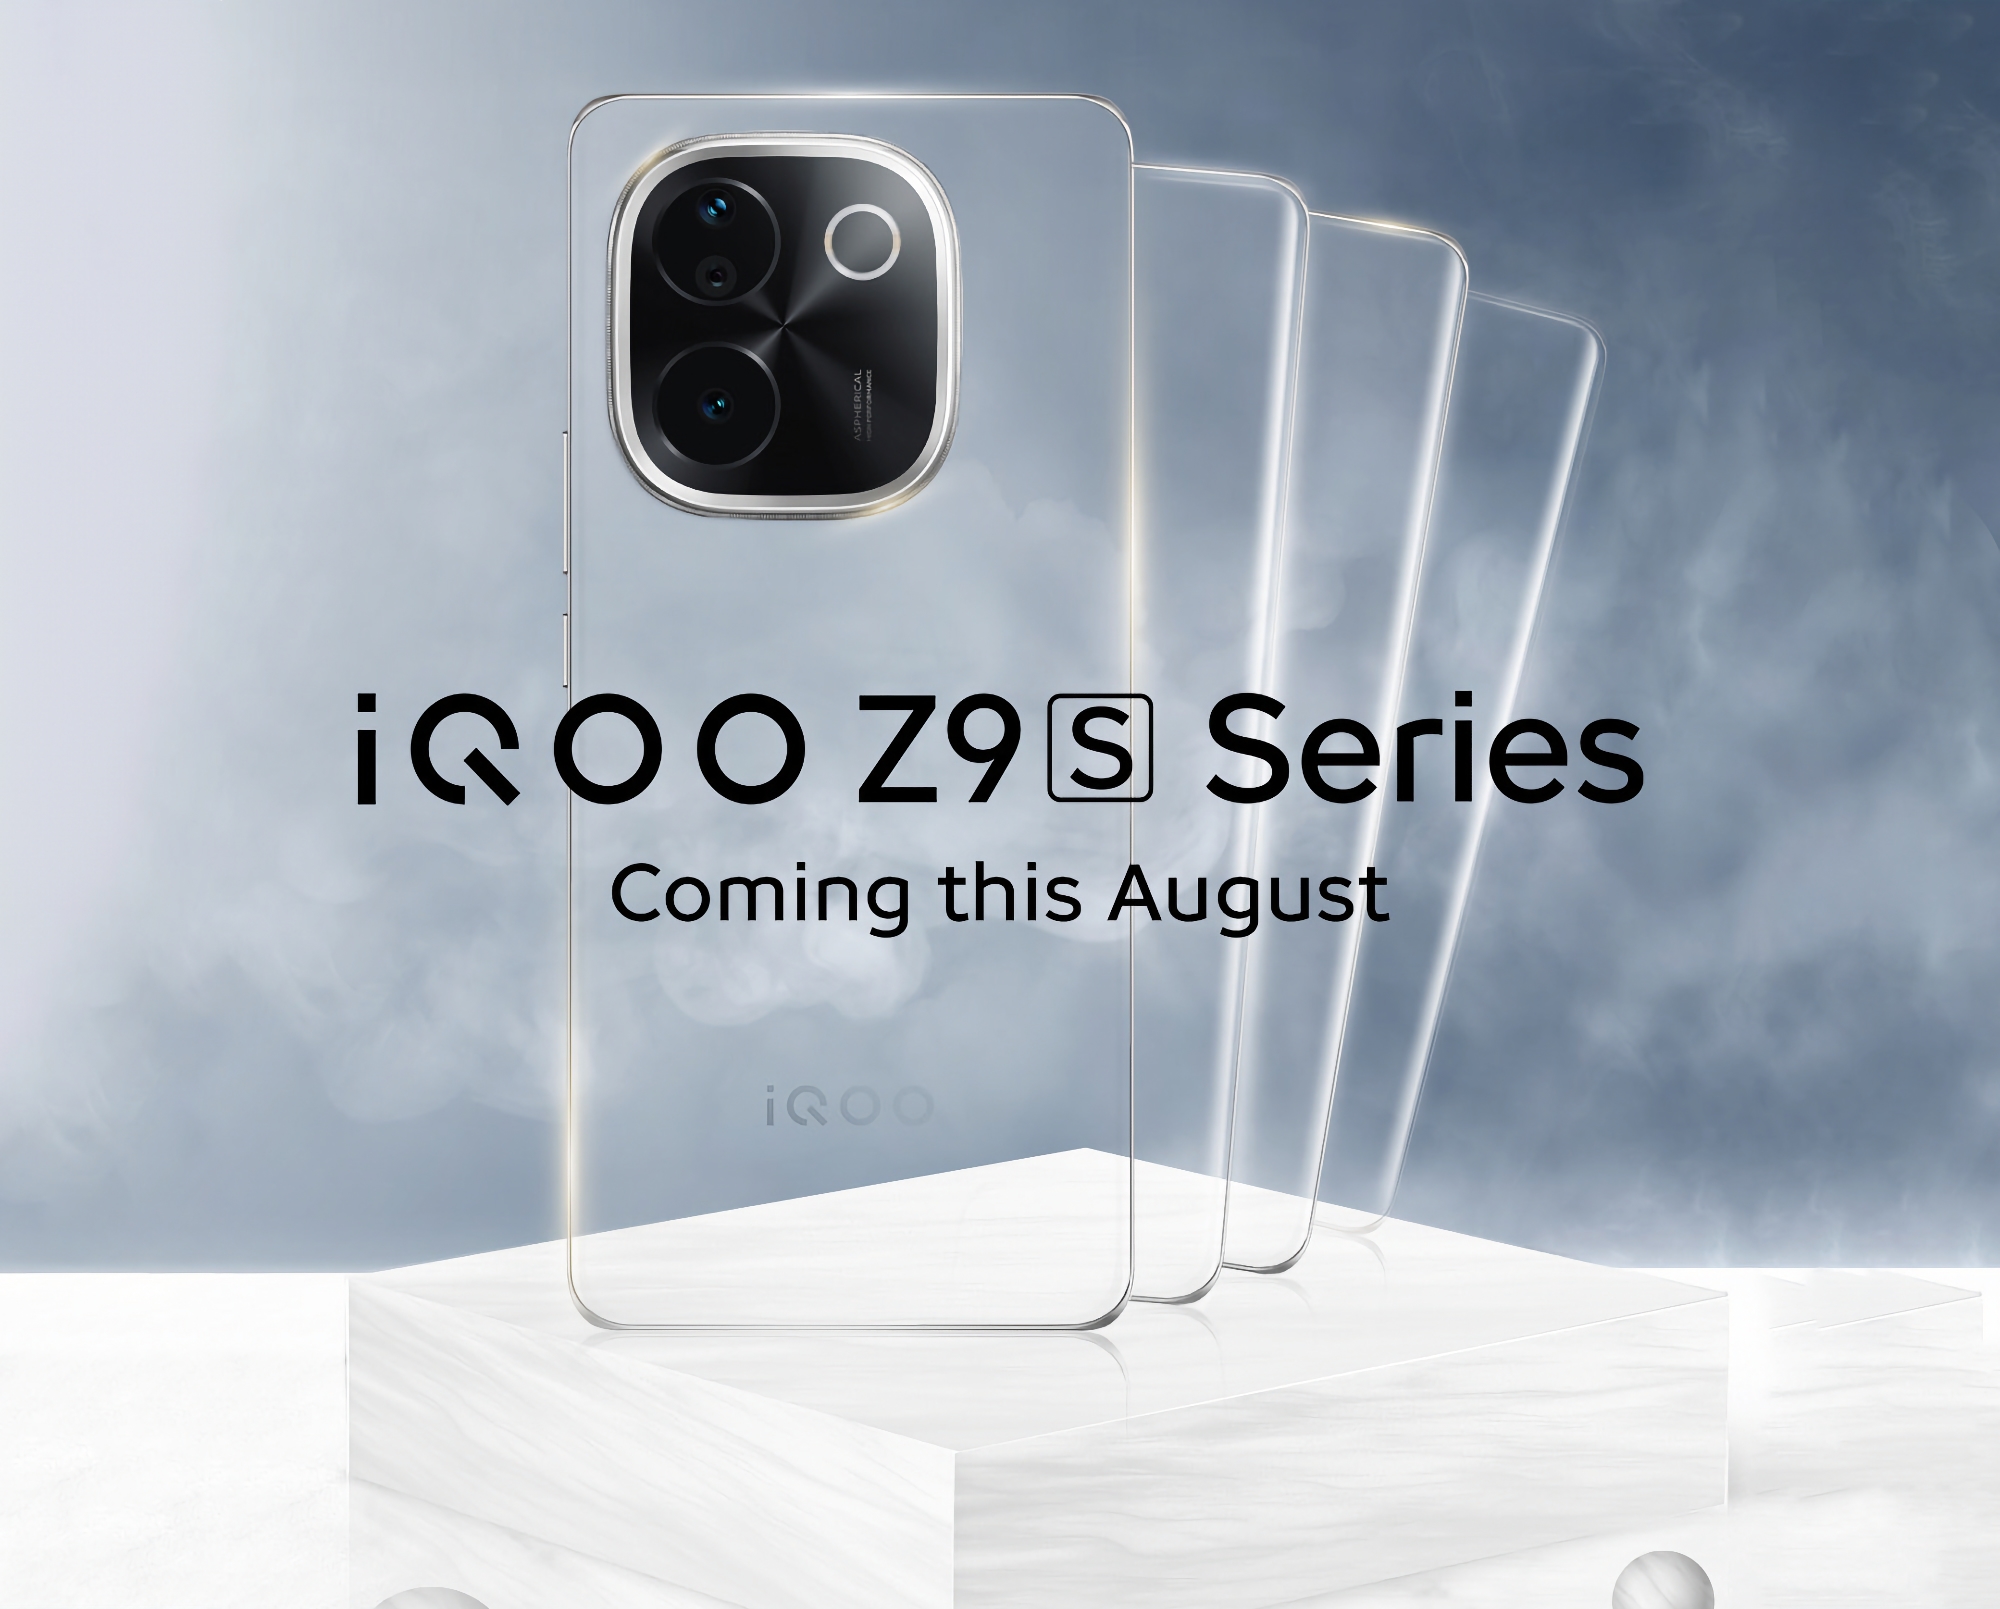 It's official: vivo will unveil the iQOO Z9S smartphone series in August